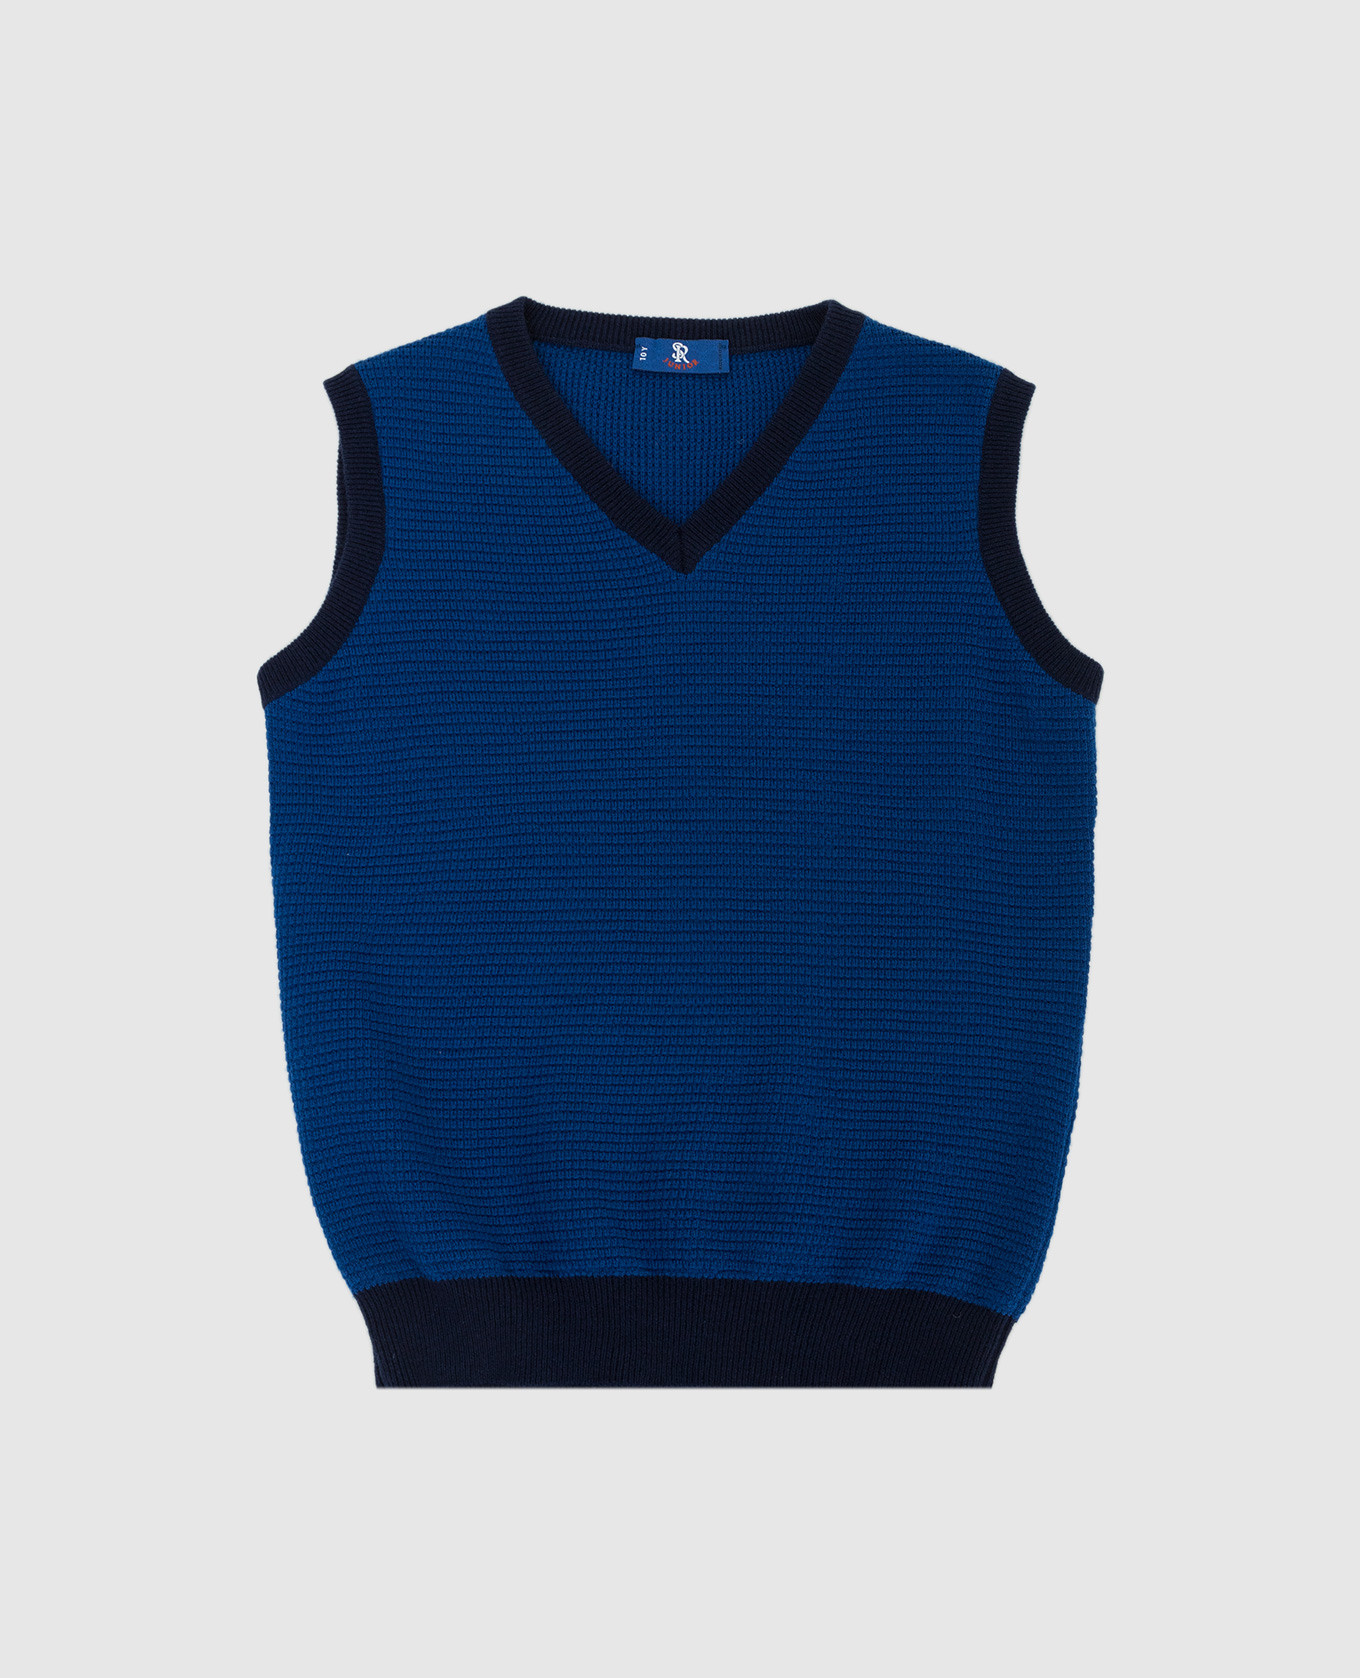 Children's vest in patterned wool and cashmere